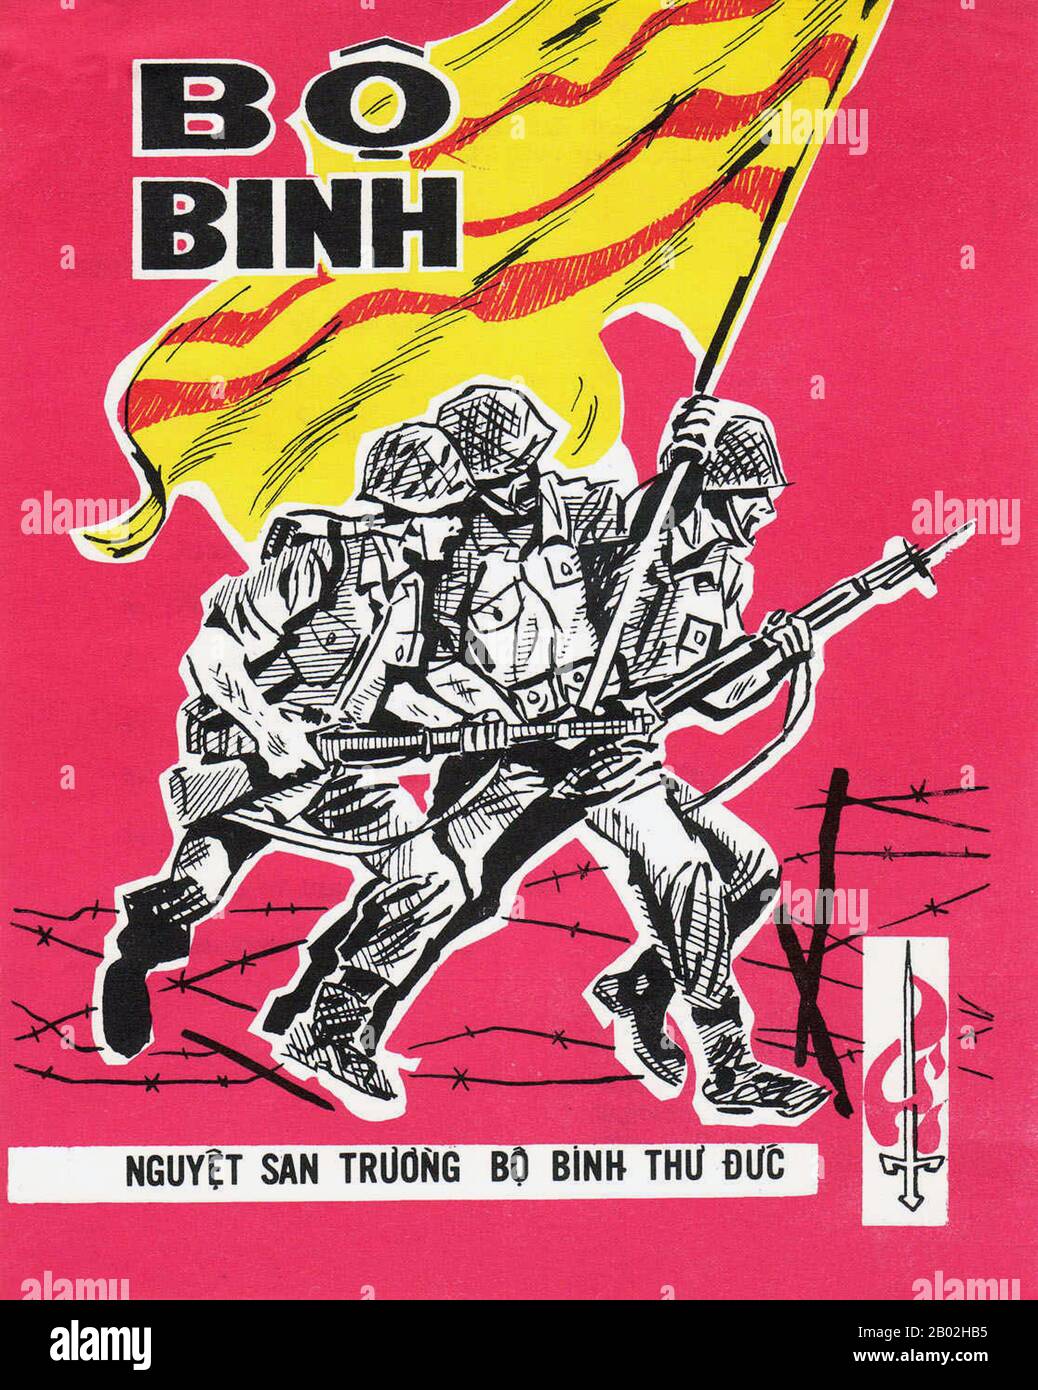 The Army of the Republic of Vietnam (ARVN) was the land-based military forces of the Republic of Vietnam (South Vietnam), which existed from October 26, 1955 until the fall of Saigon on April 30, 1975.   After the fall of Saigon and the communist victory, the ARVN was dissolved. While some members had fled the country to the United States or elsewhere, hundreds of thousands of former ARVN soldiers were sent to reeducation camps by the newly unified Vietnamese communist government. Stock Photo